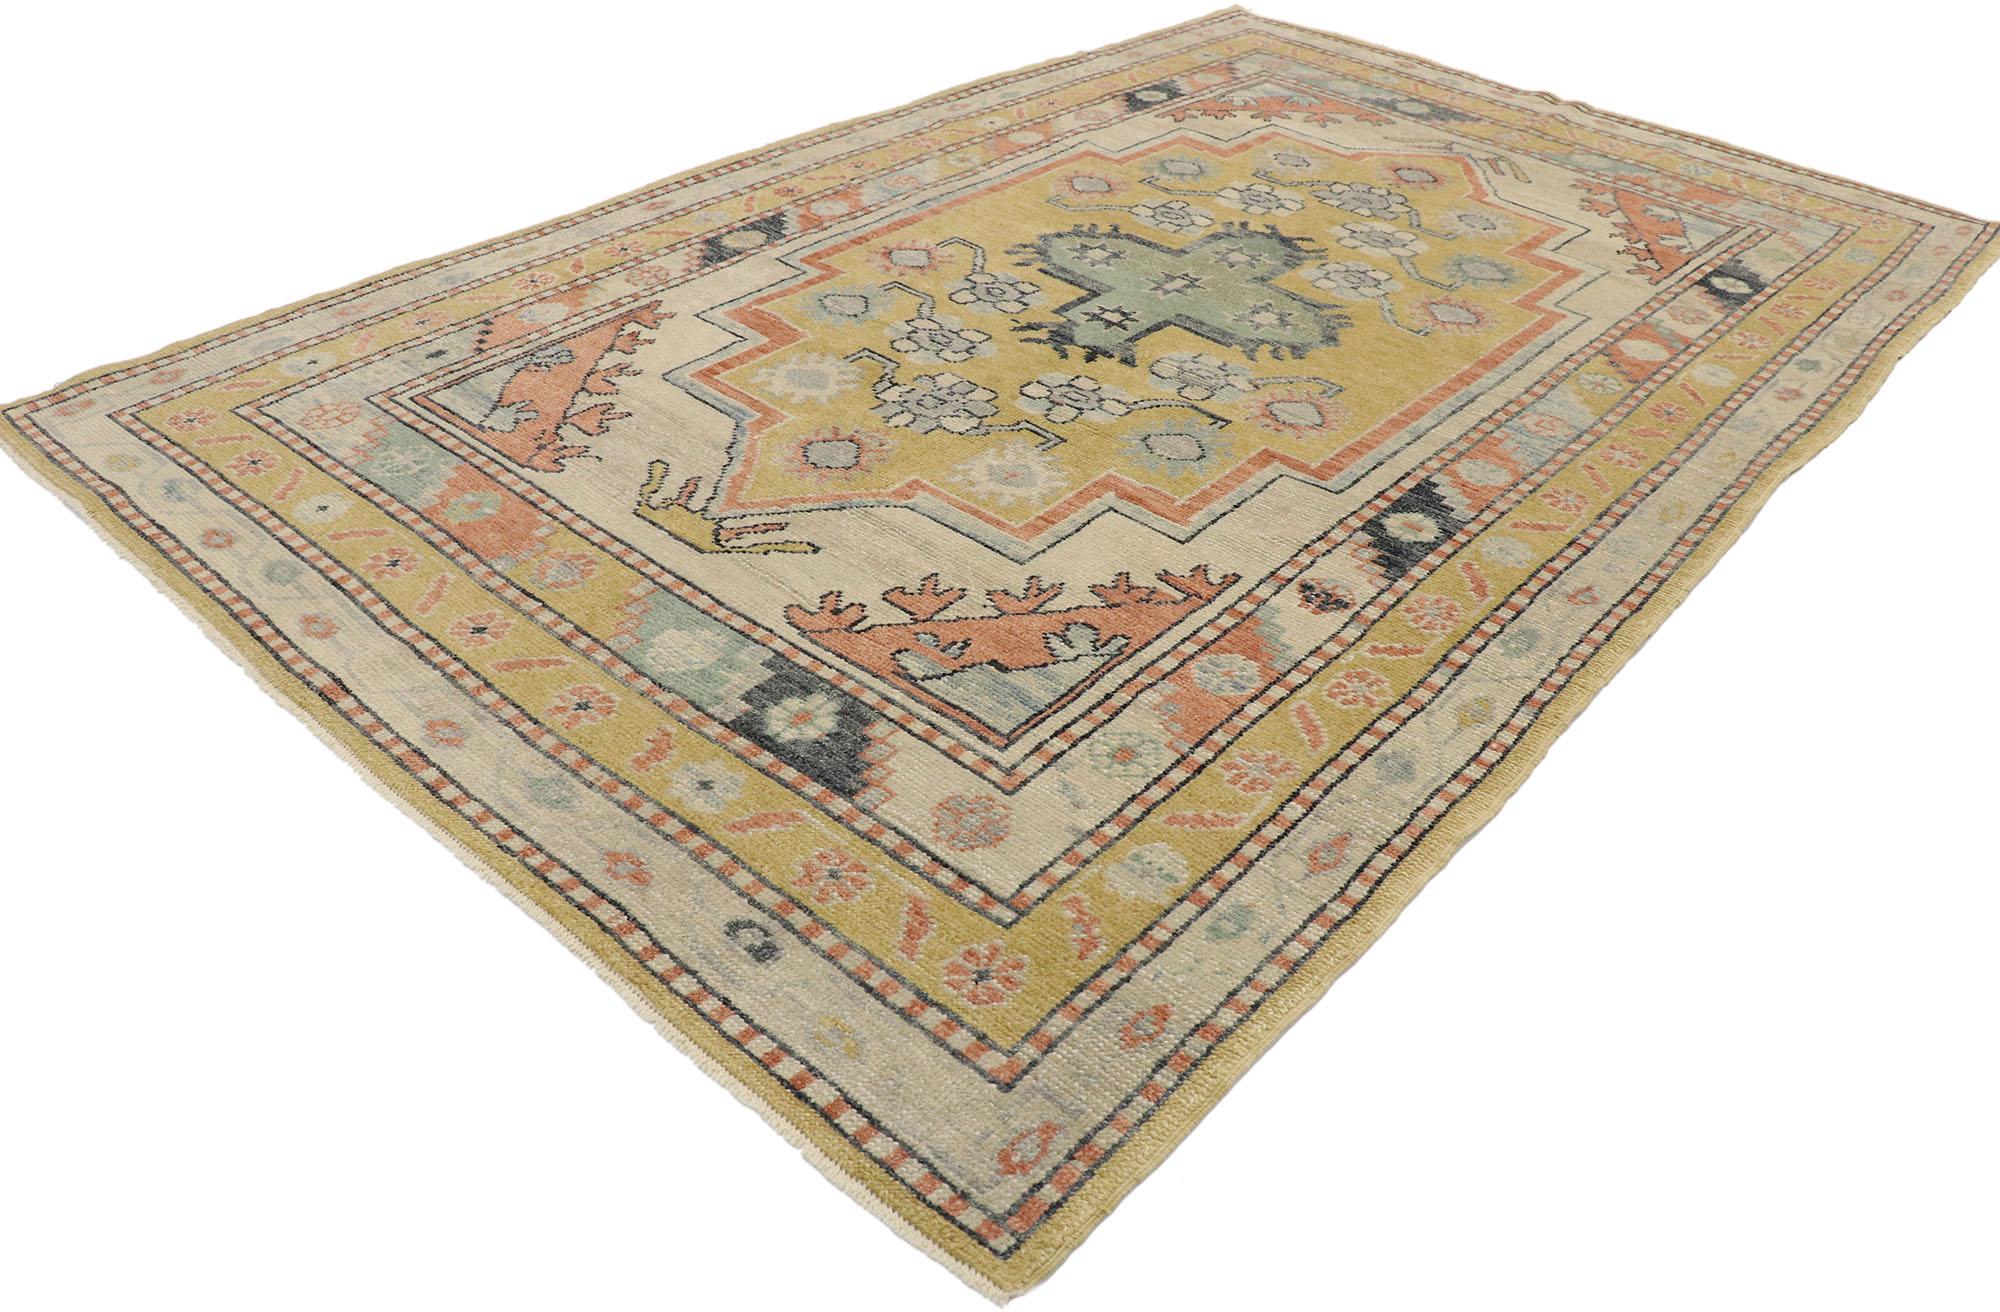 53266, new contemporary Turkish Oushak rug with Postmodern Arts & Crafts style. This hand knotted wool new contemporary Turkish Oushak rug features an oversized stepped golden-colored medallion set against an abrashed neutral field. The medallion